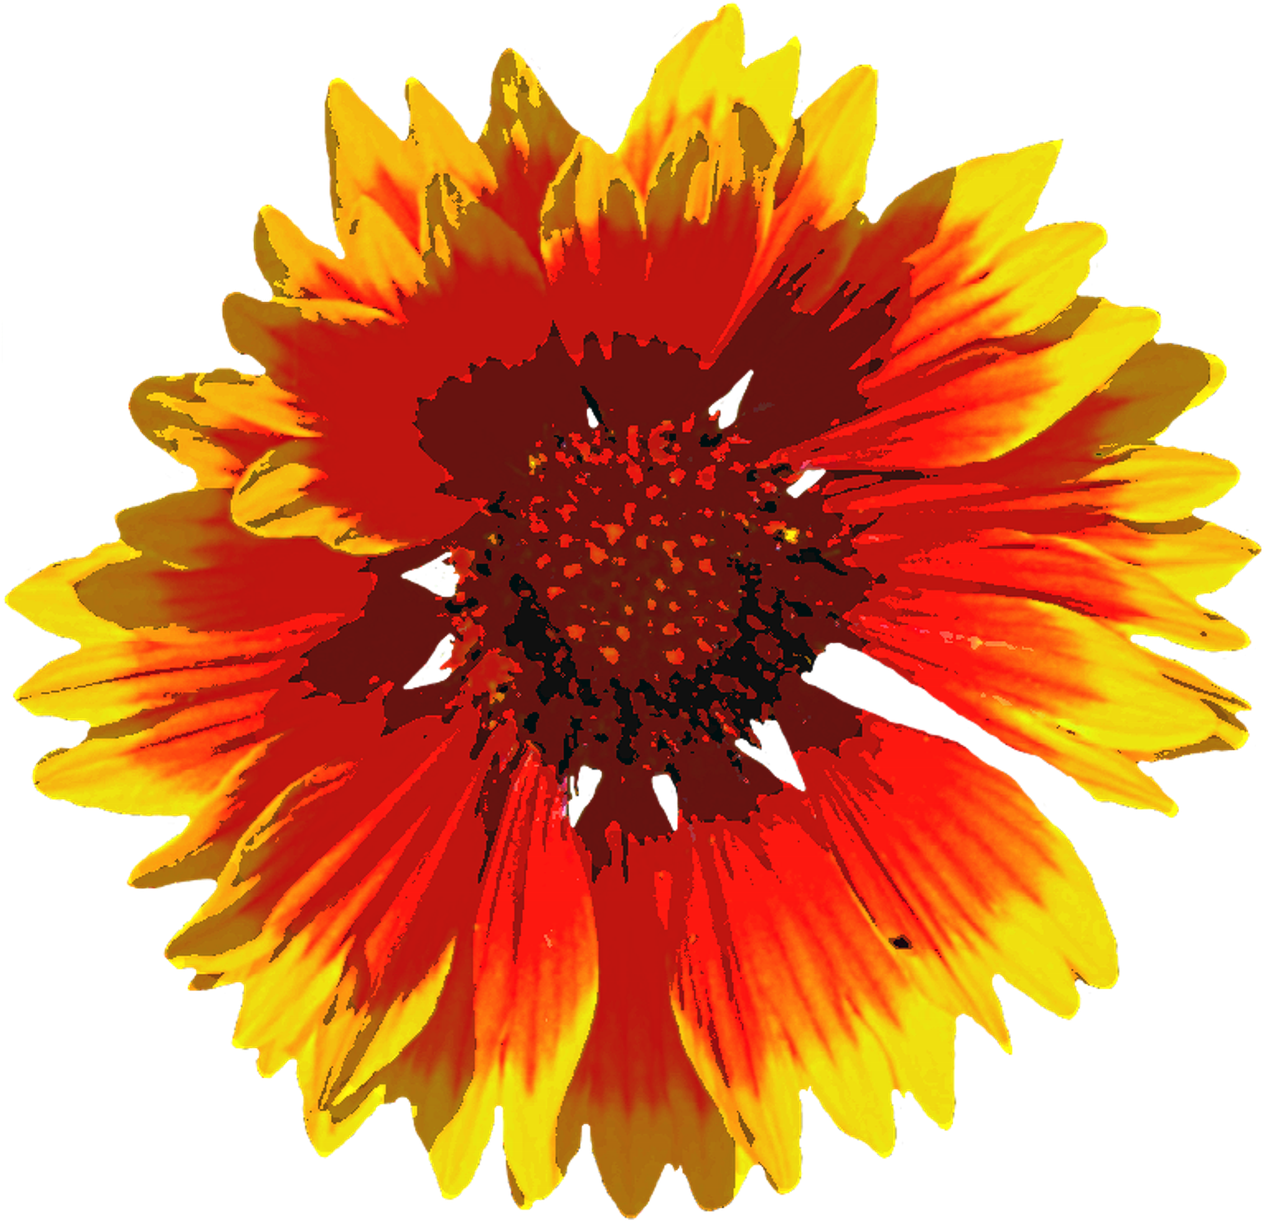 Download A Close Up Of A Flower [100% Free] - FastPNG